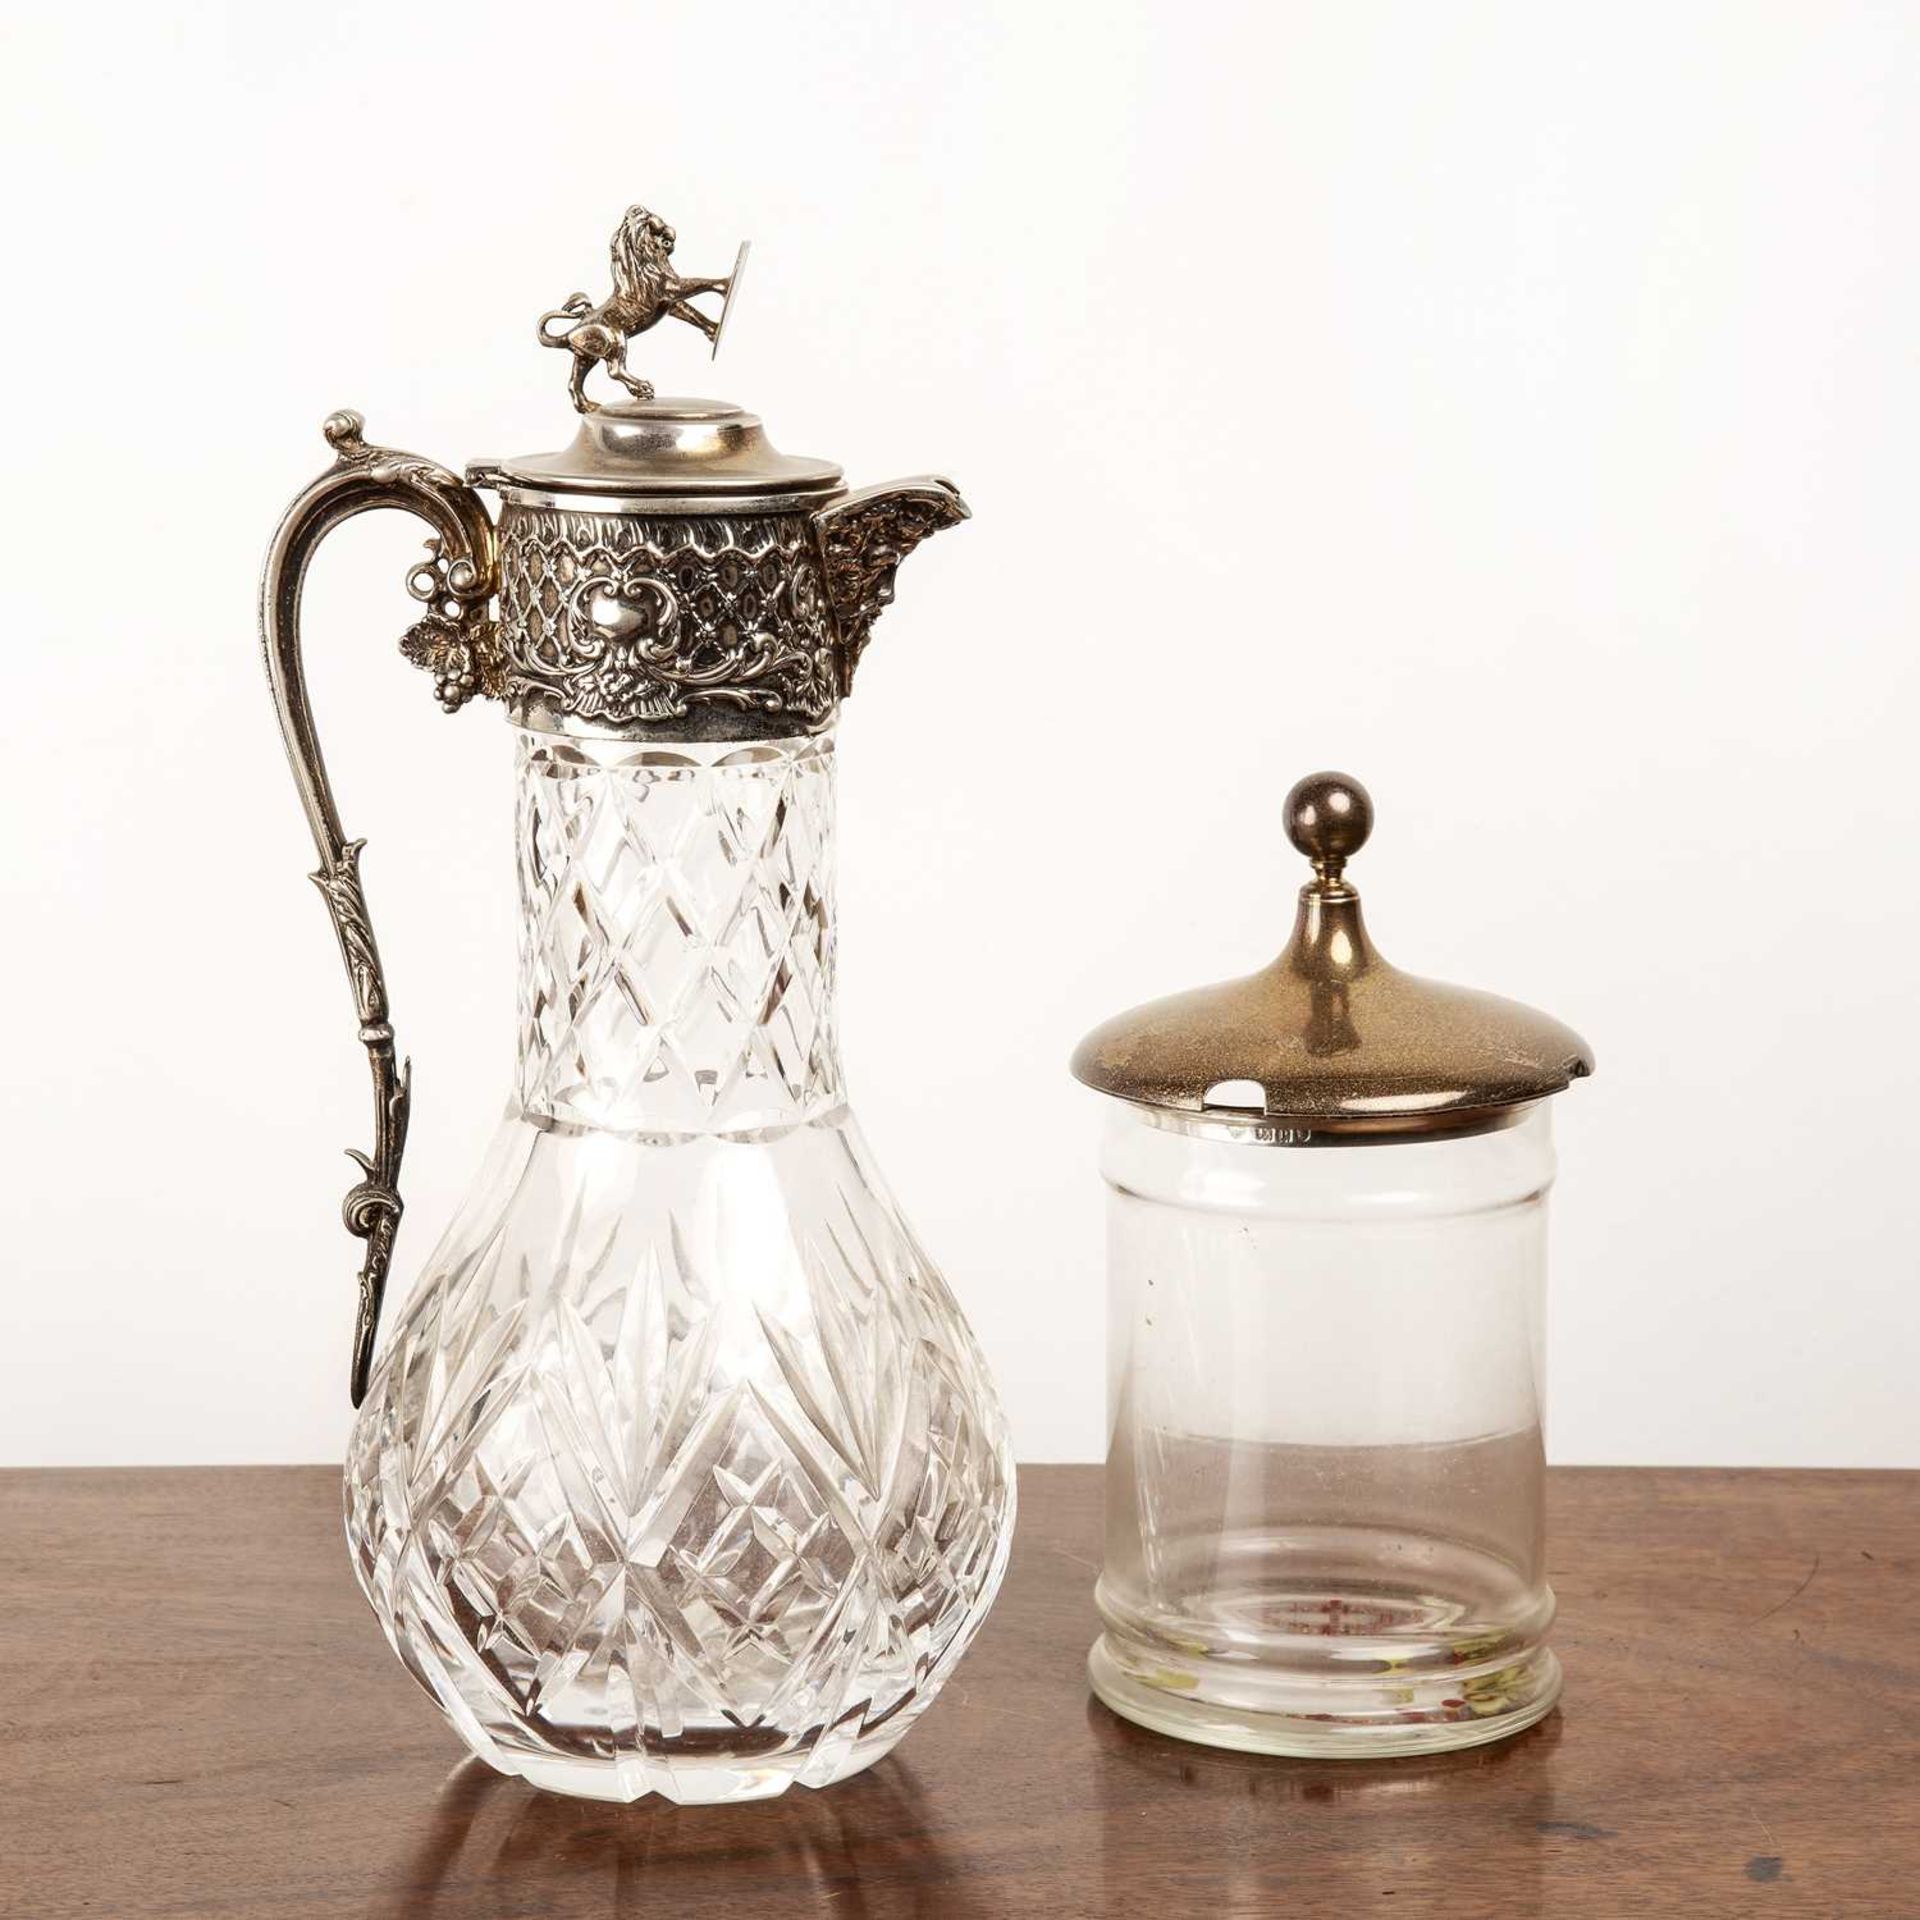 Heavy glass and silver plated claret jug with a lion finial, 30cm high and a silver lidded glass